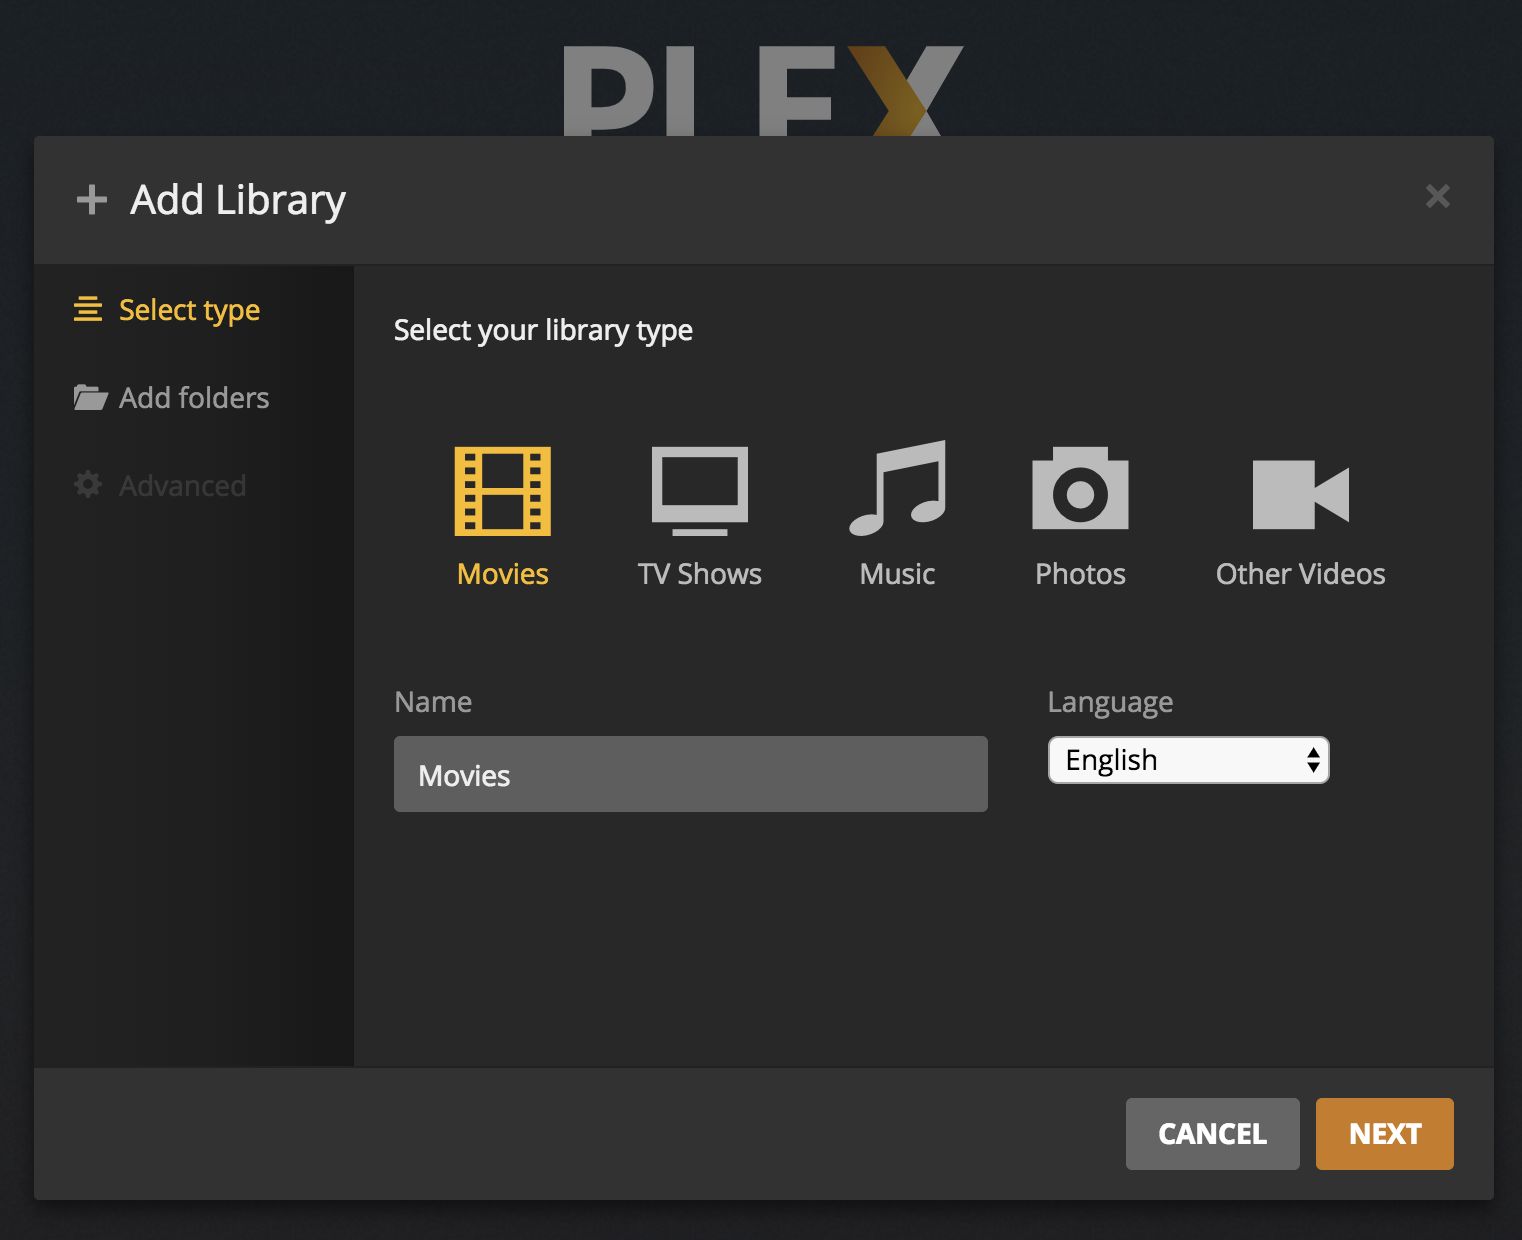 Select Movies and click next